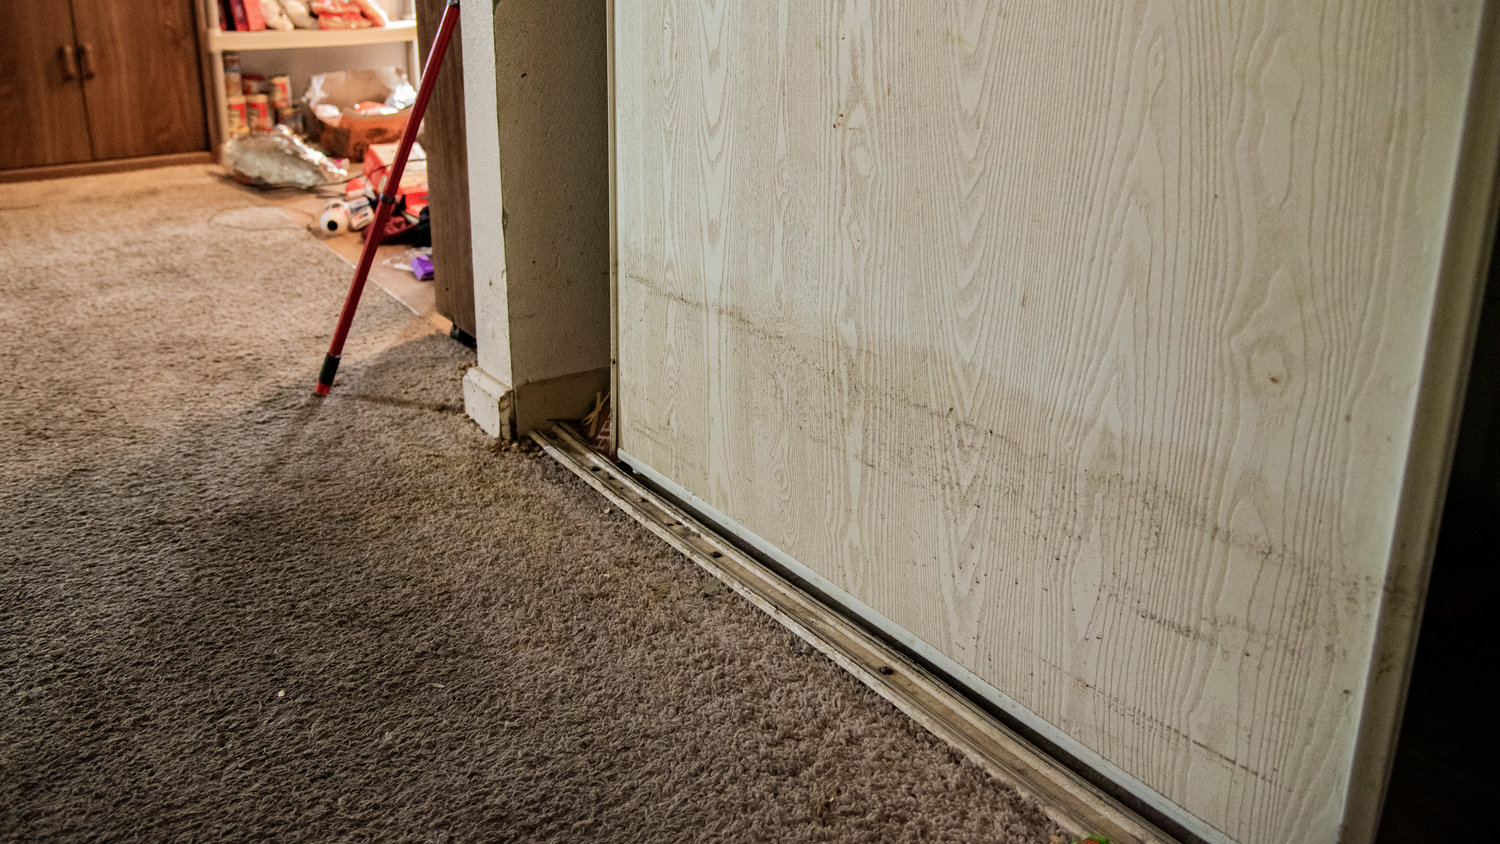 The water line is visible inside Alicia Cook’s apartment building after flood water flowed into multiple rooms damaging furniture and belongings at the Chehalis Avenue Apartments.